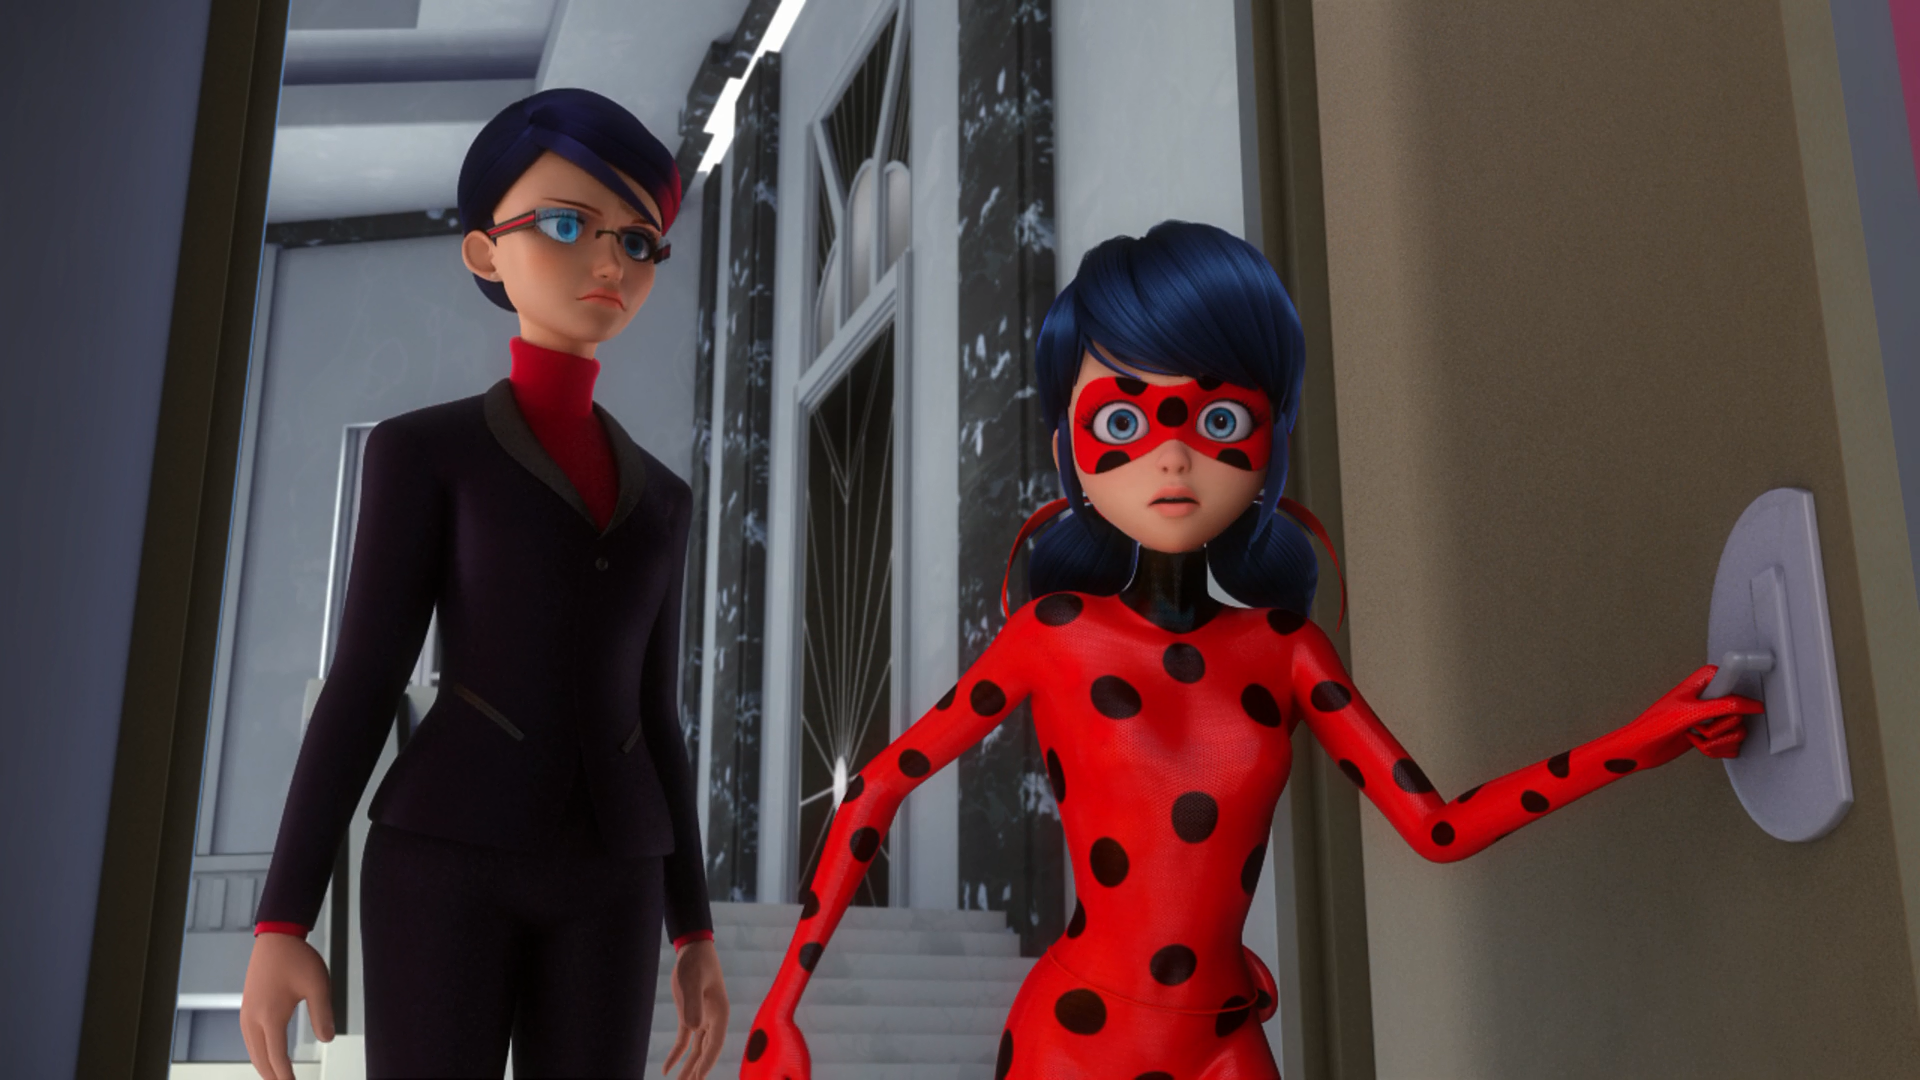 Miraculous Ladybug And Chat Noir, female character red suit